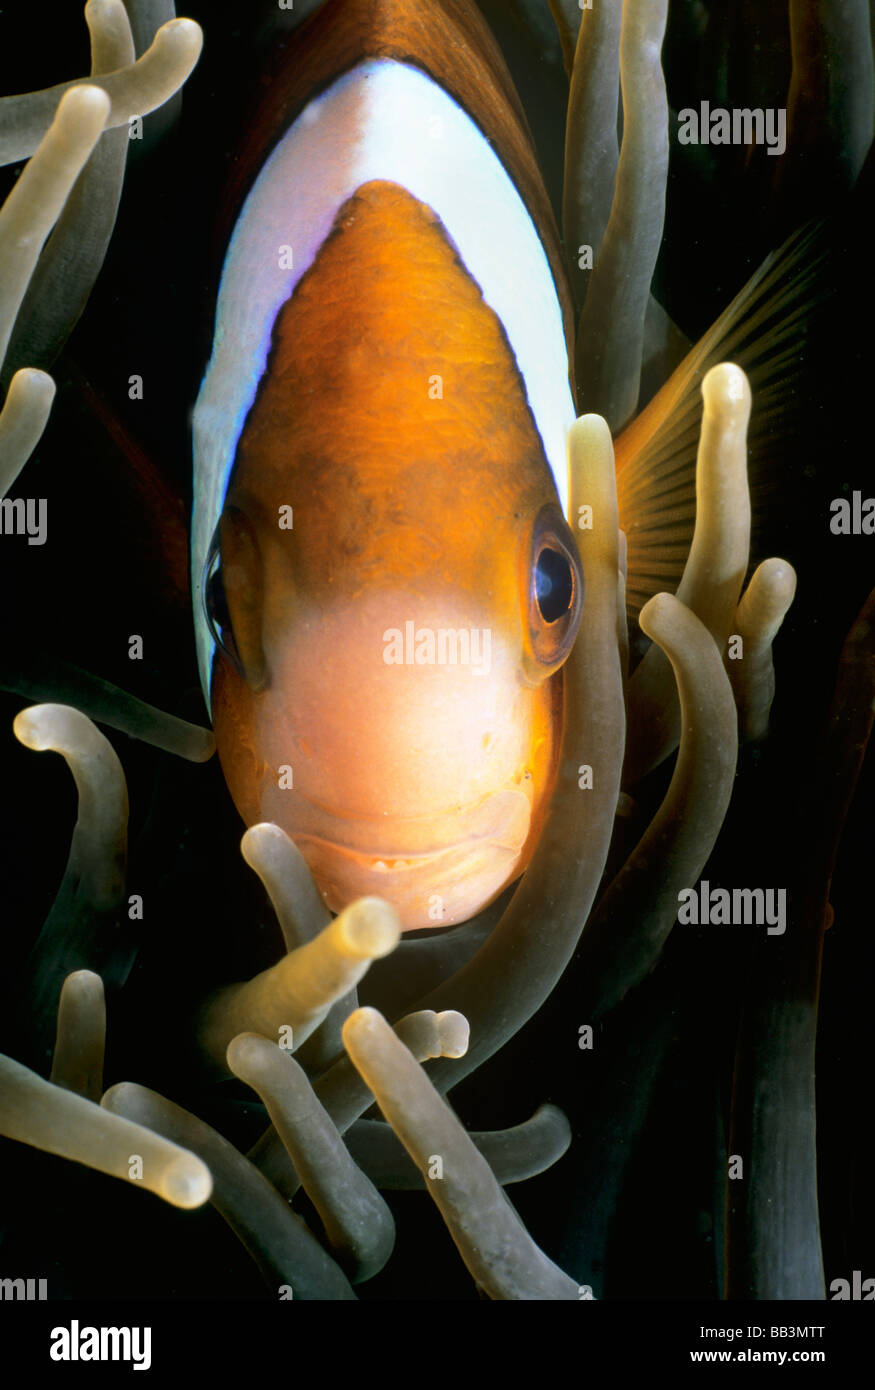 Barrier Reef Anemonefish Amphiprion akindynos Lembeh Strait Celebes Sea Sulawesi Indonesia Stock Photo